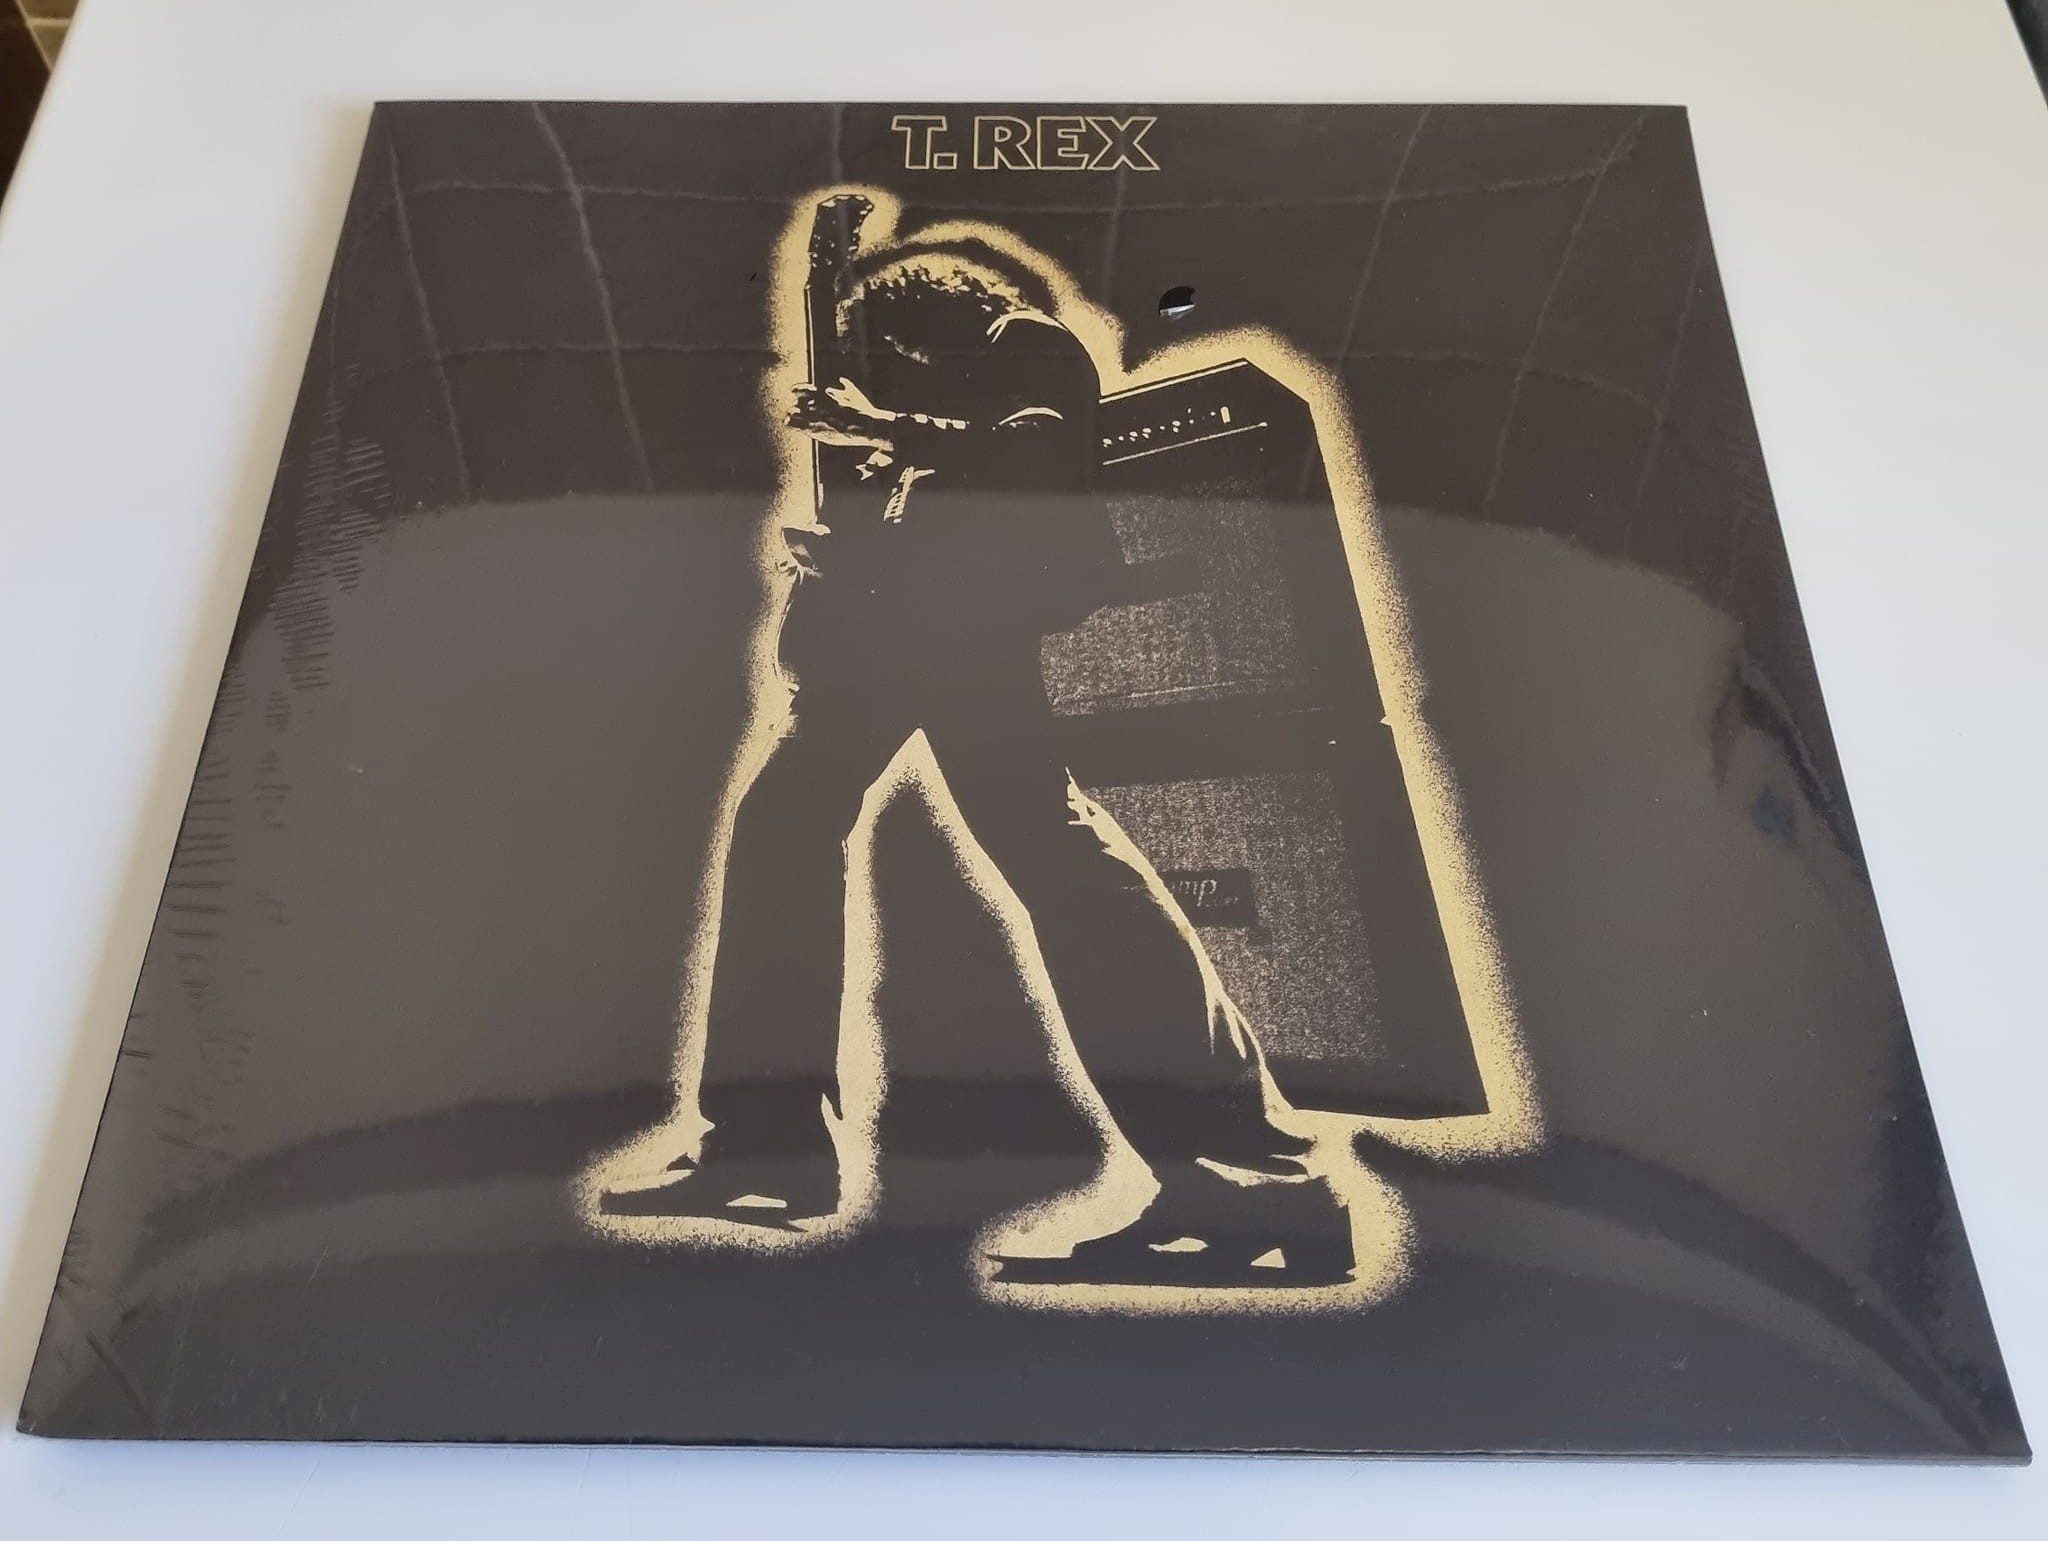 Buy this rare T rex record by clicking here